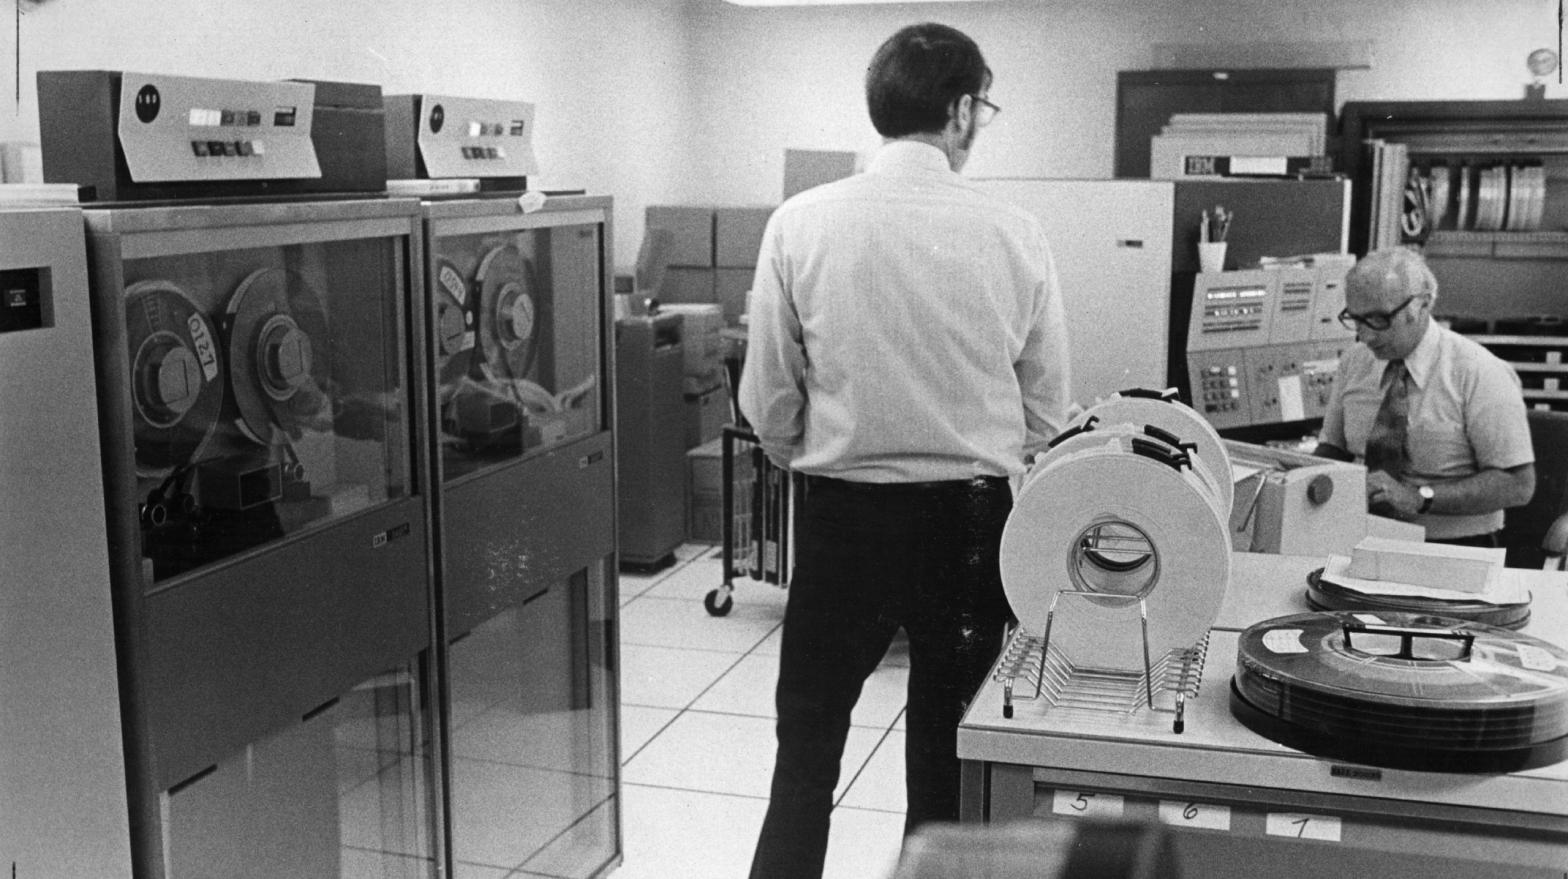 Computers and magnetic tape storage at the U.S. Department of Justice circa 1973. (Photo: Hulton Archive/Getty Images, Getty Images)